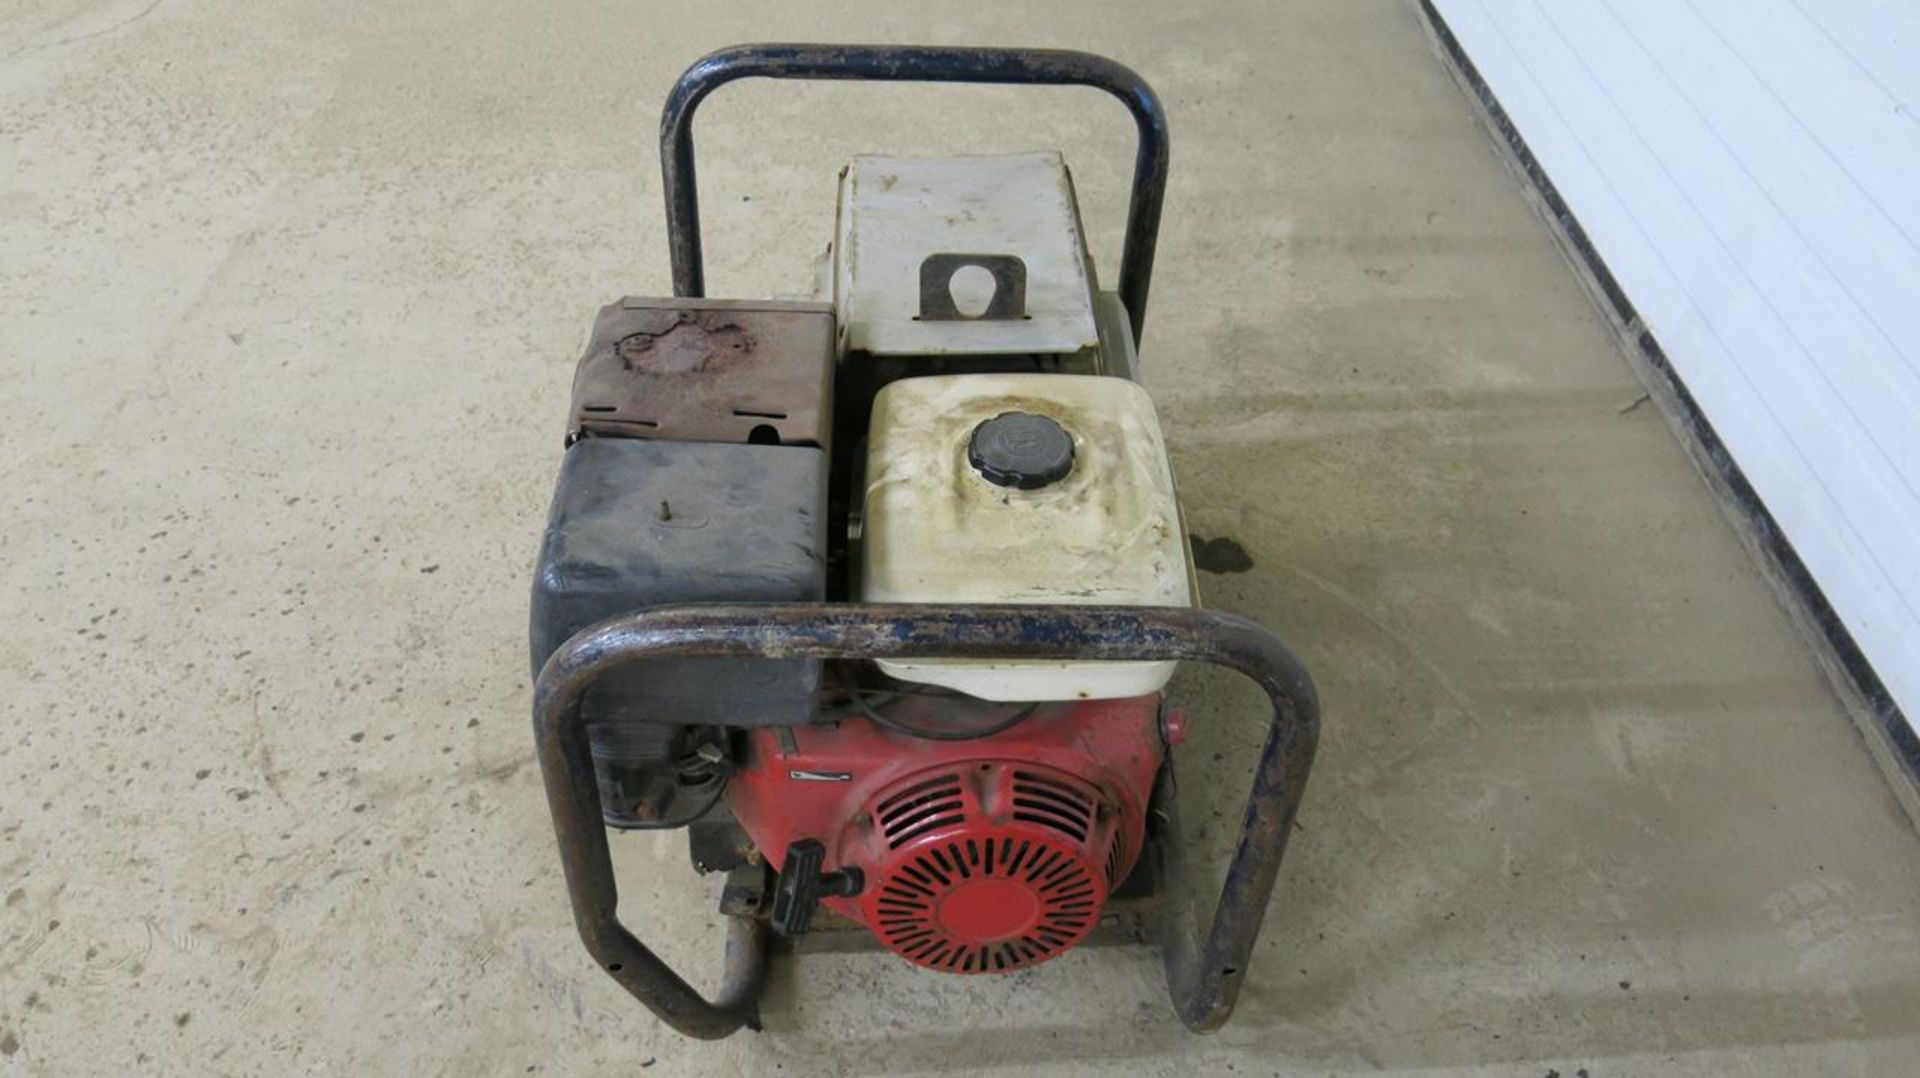 RED-D-ARC, GX200, 2+4, 200 AMP, GAS POWERED, WELDER - Image 6 of 7